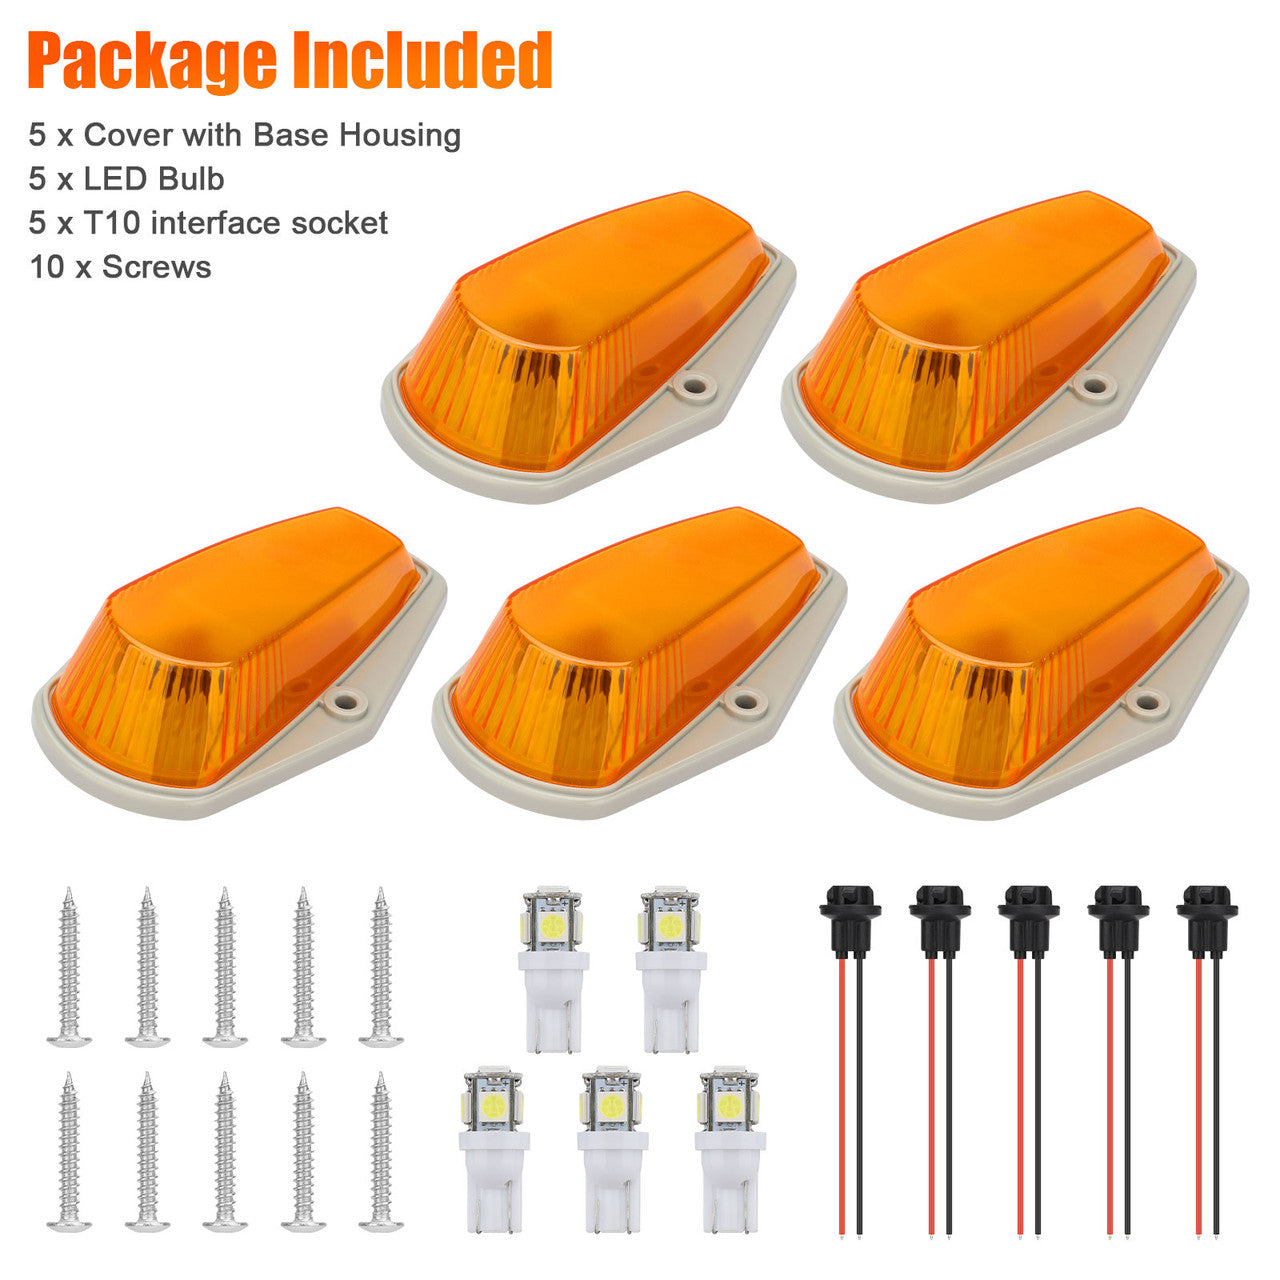 Car Roof Top Light with a T10 Plug Socket, Easy to Install and is compatible with most vehicles,5Pcs